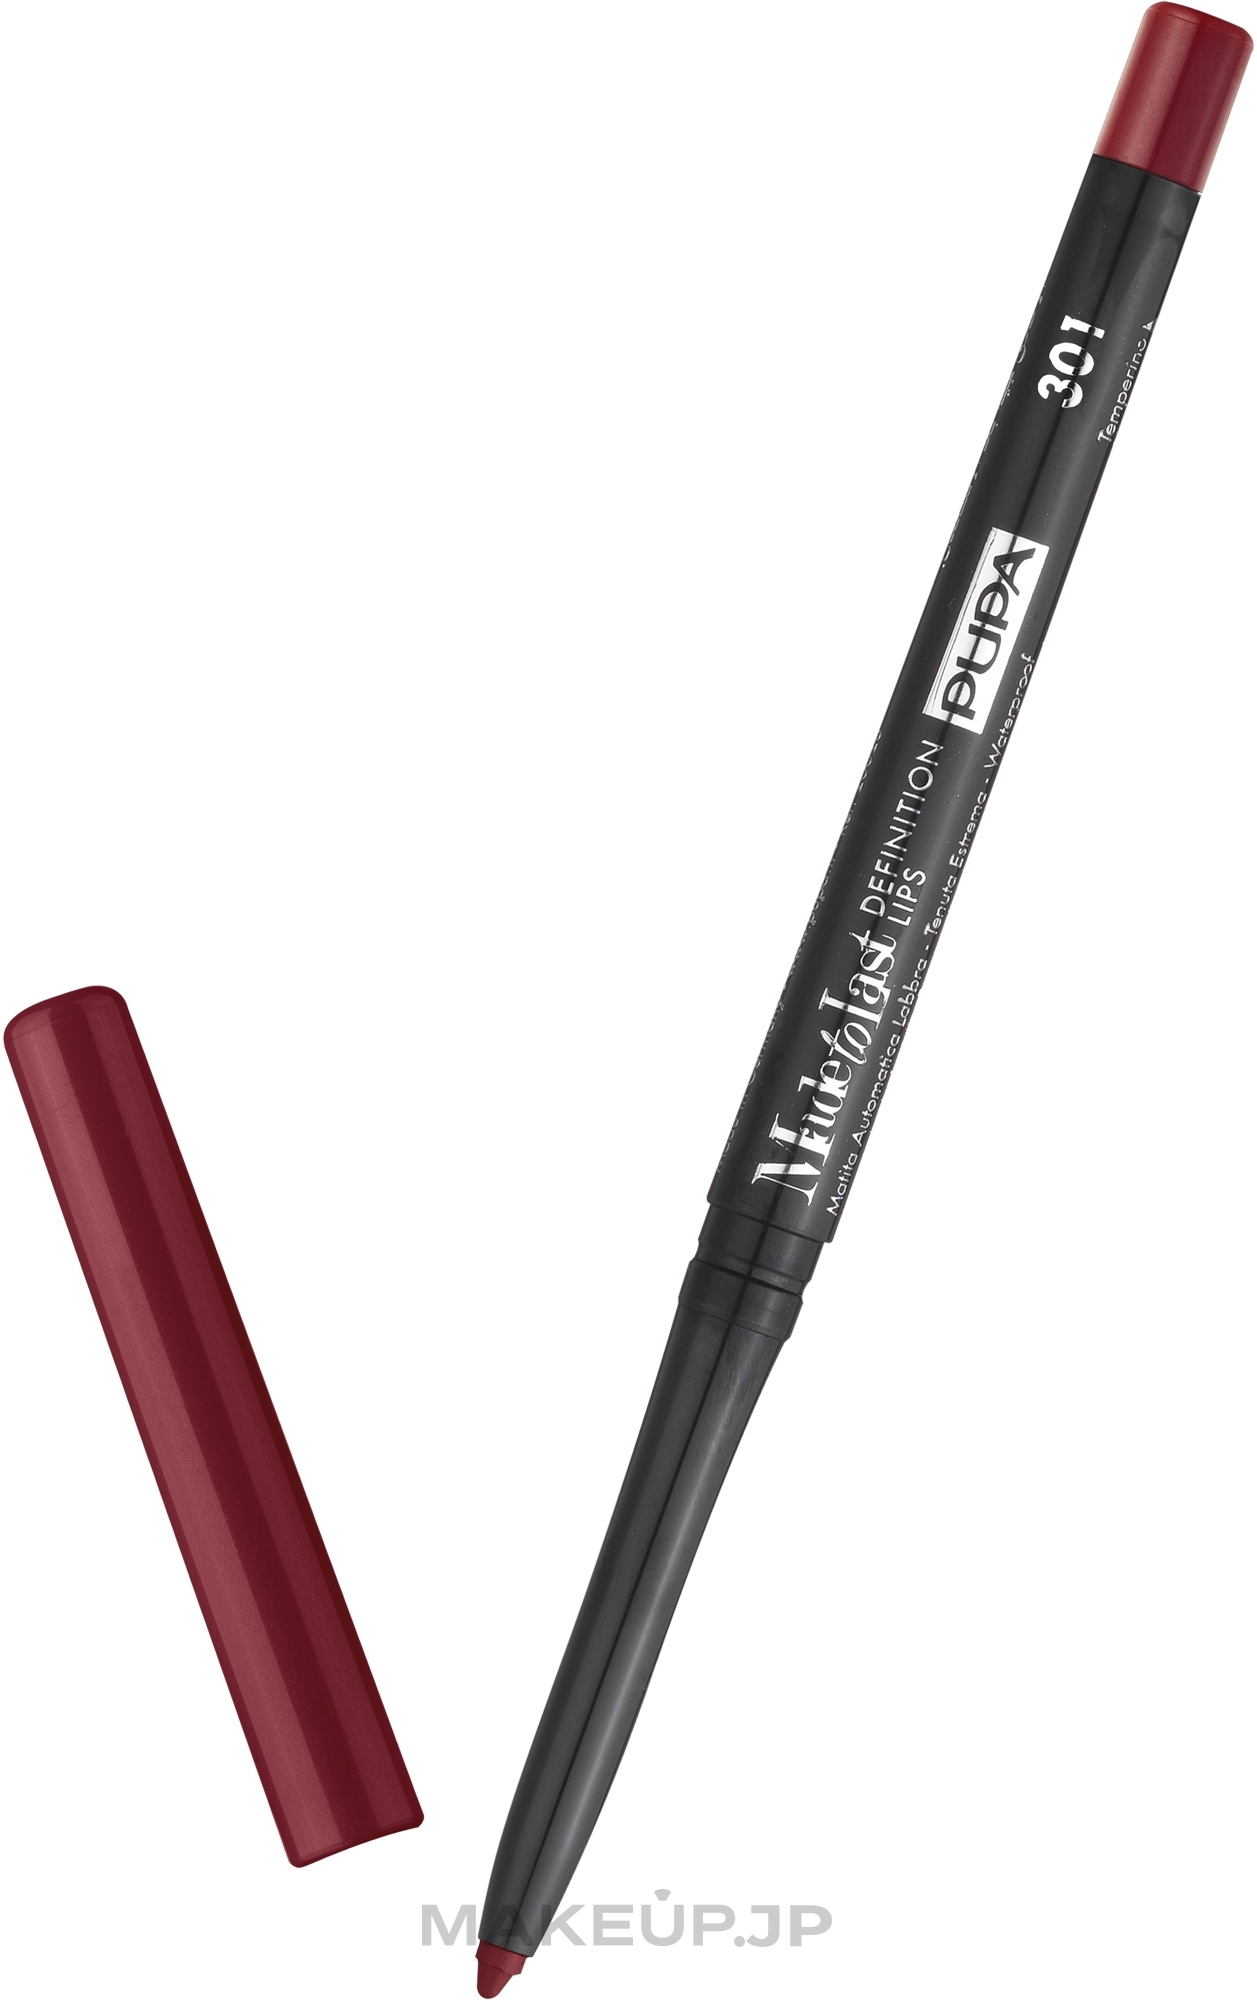 Extreme Long-Lasting Automatic Waterproof Lip Liner - Pupa Made to Last Definition Lips  — photo 301 - Tierra Siena